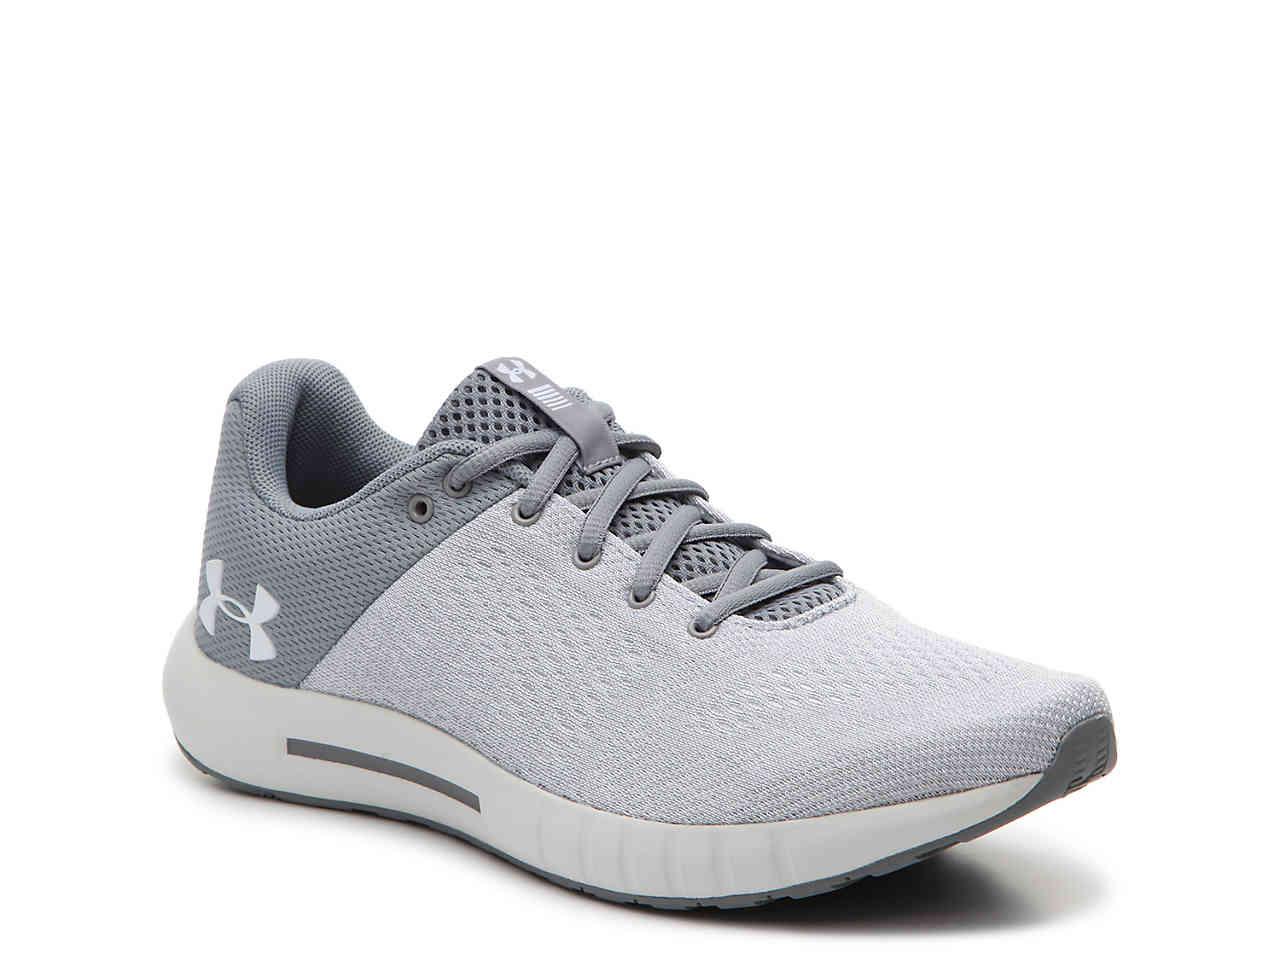 Under Armour Rubber Micro G Pursuit Lightweight Running Shoe in Grey ...